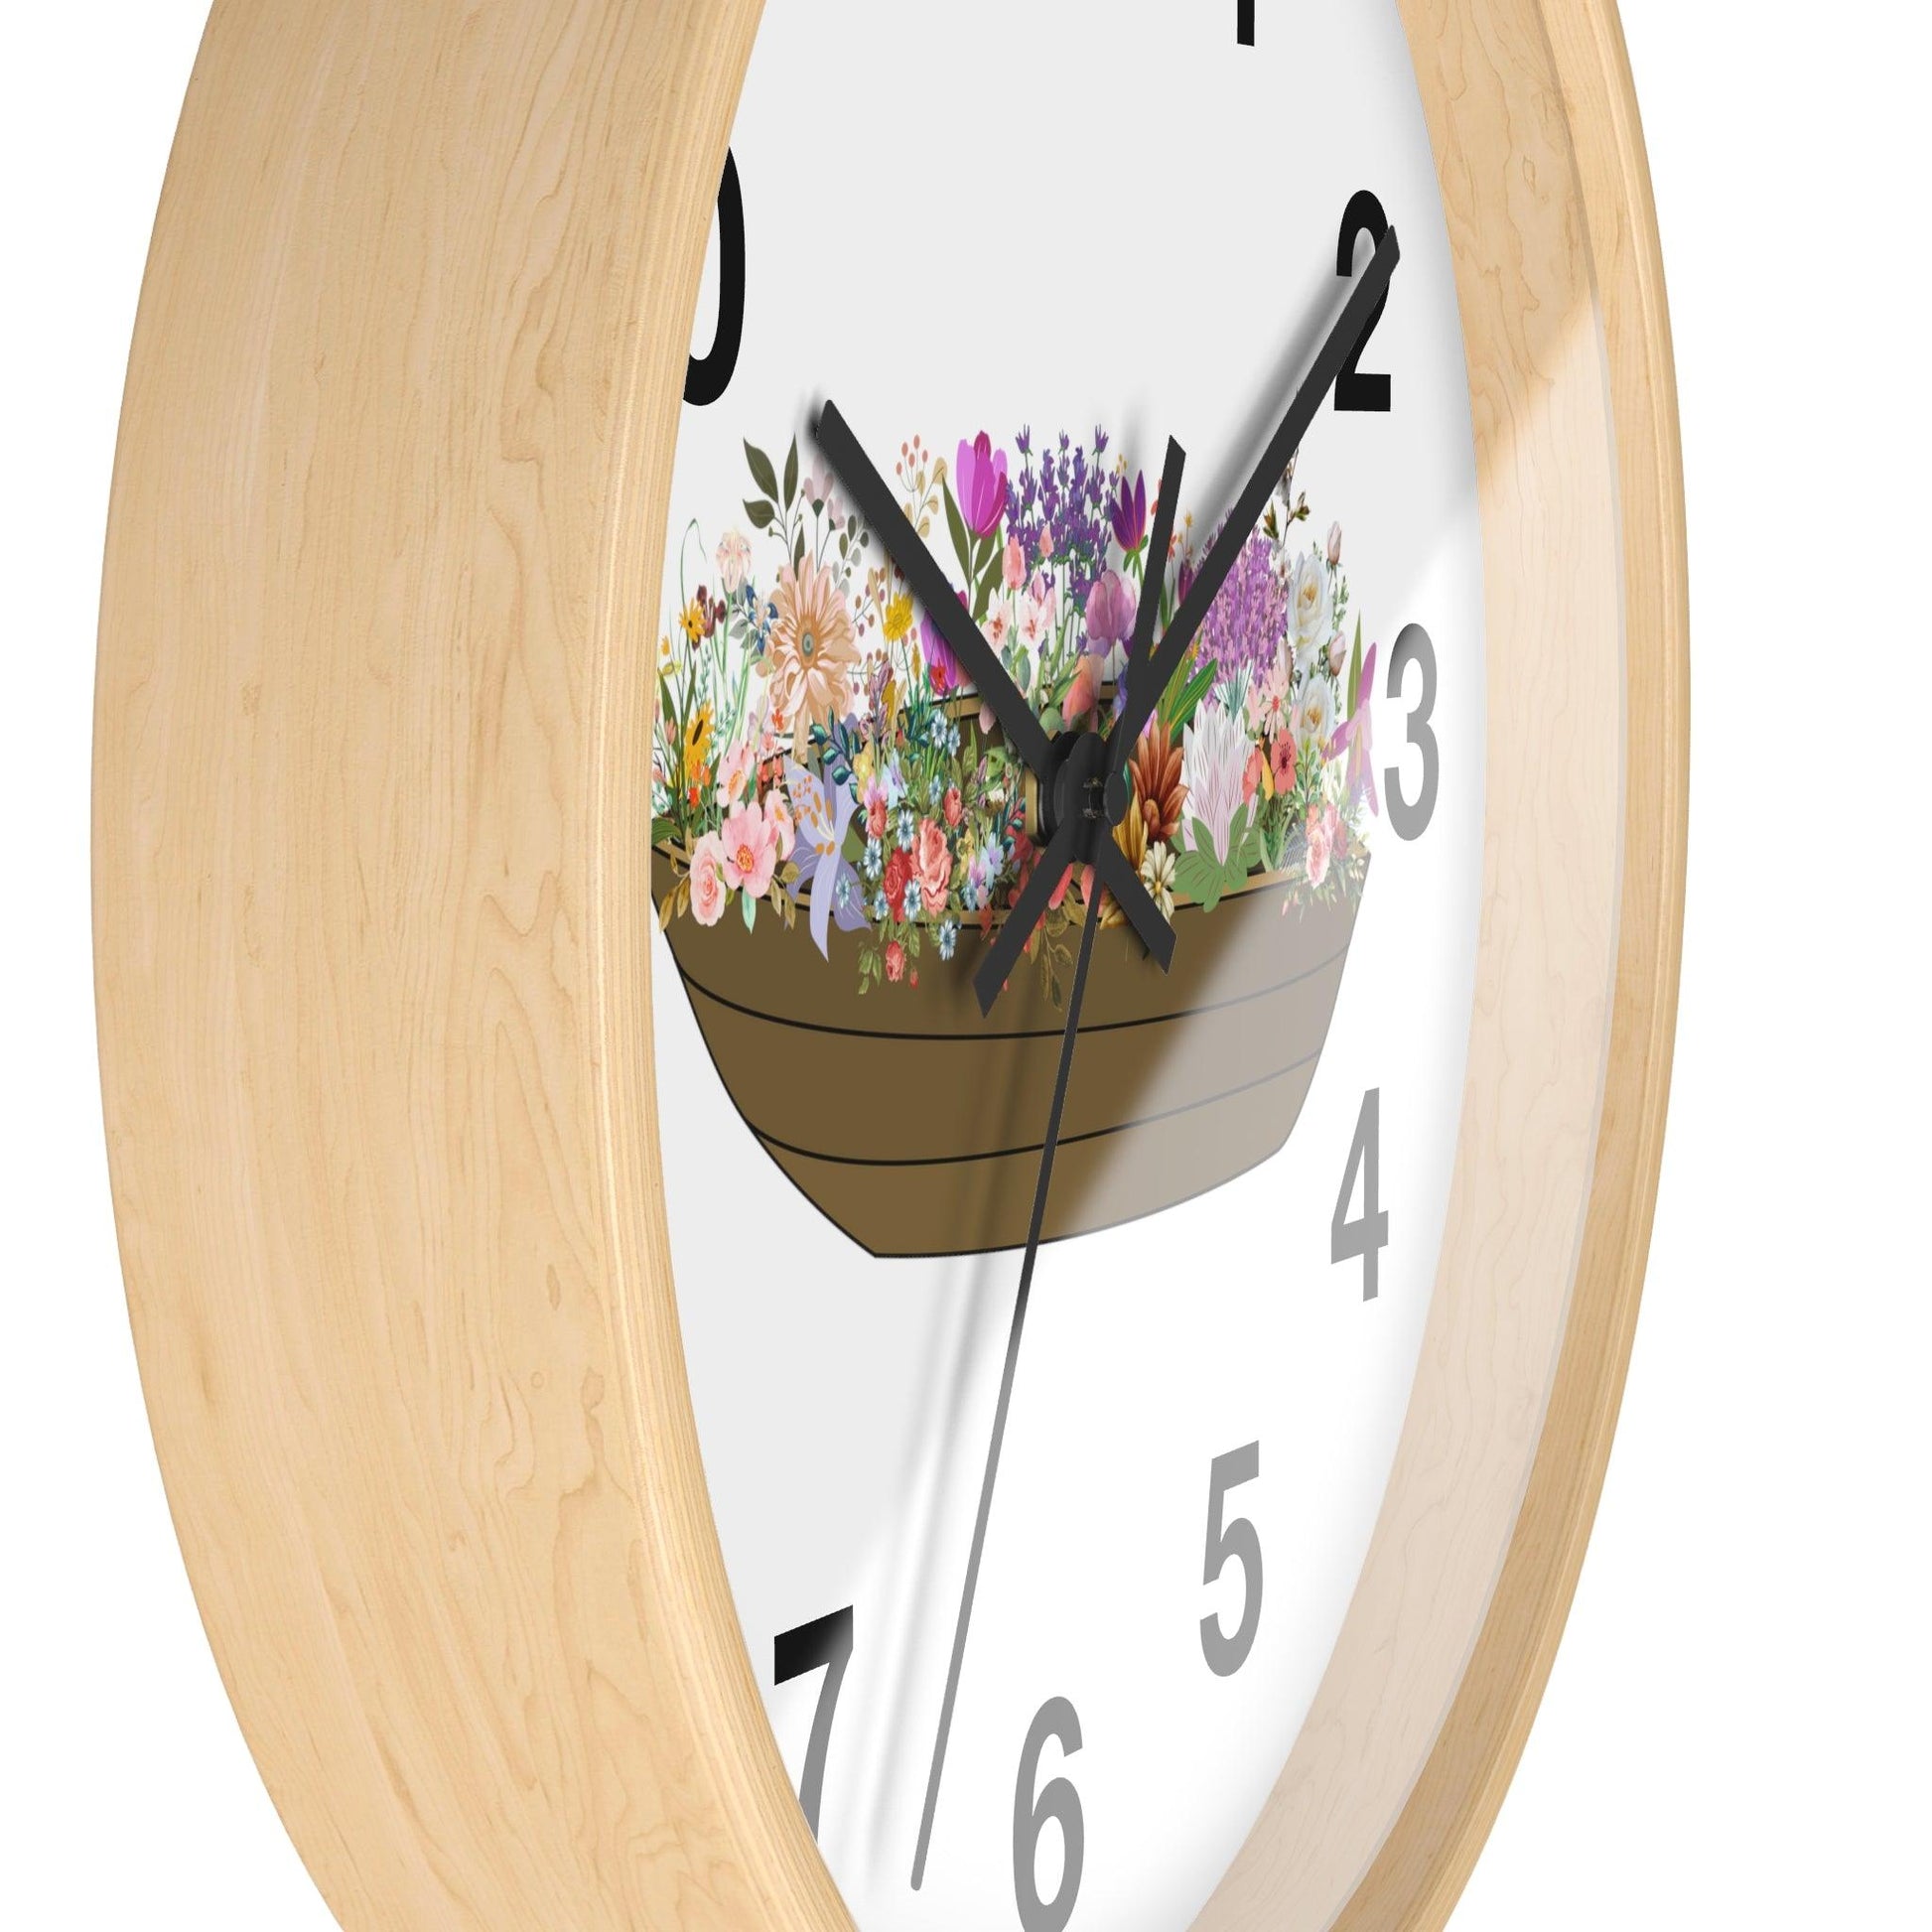 Boat Flower Wall Clock Floral Wall Clock Home Decor Gift House Warming gift - Unique Gift Farmhouse Clocks For Wall Living Room Bedroom - Giftsmojo